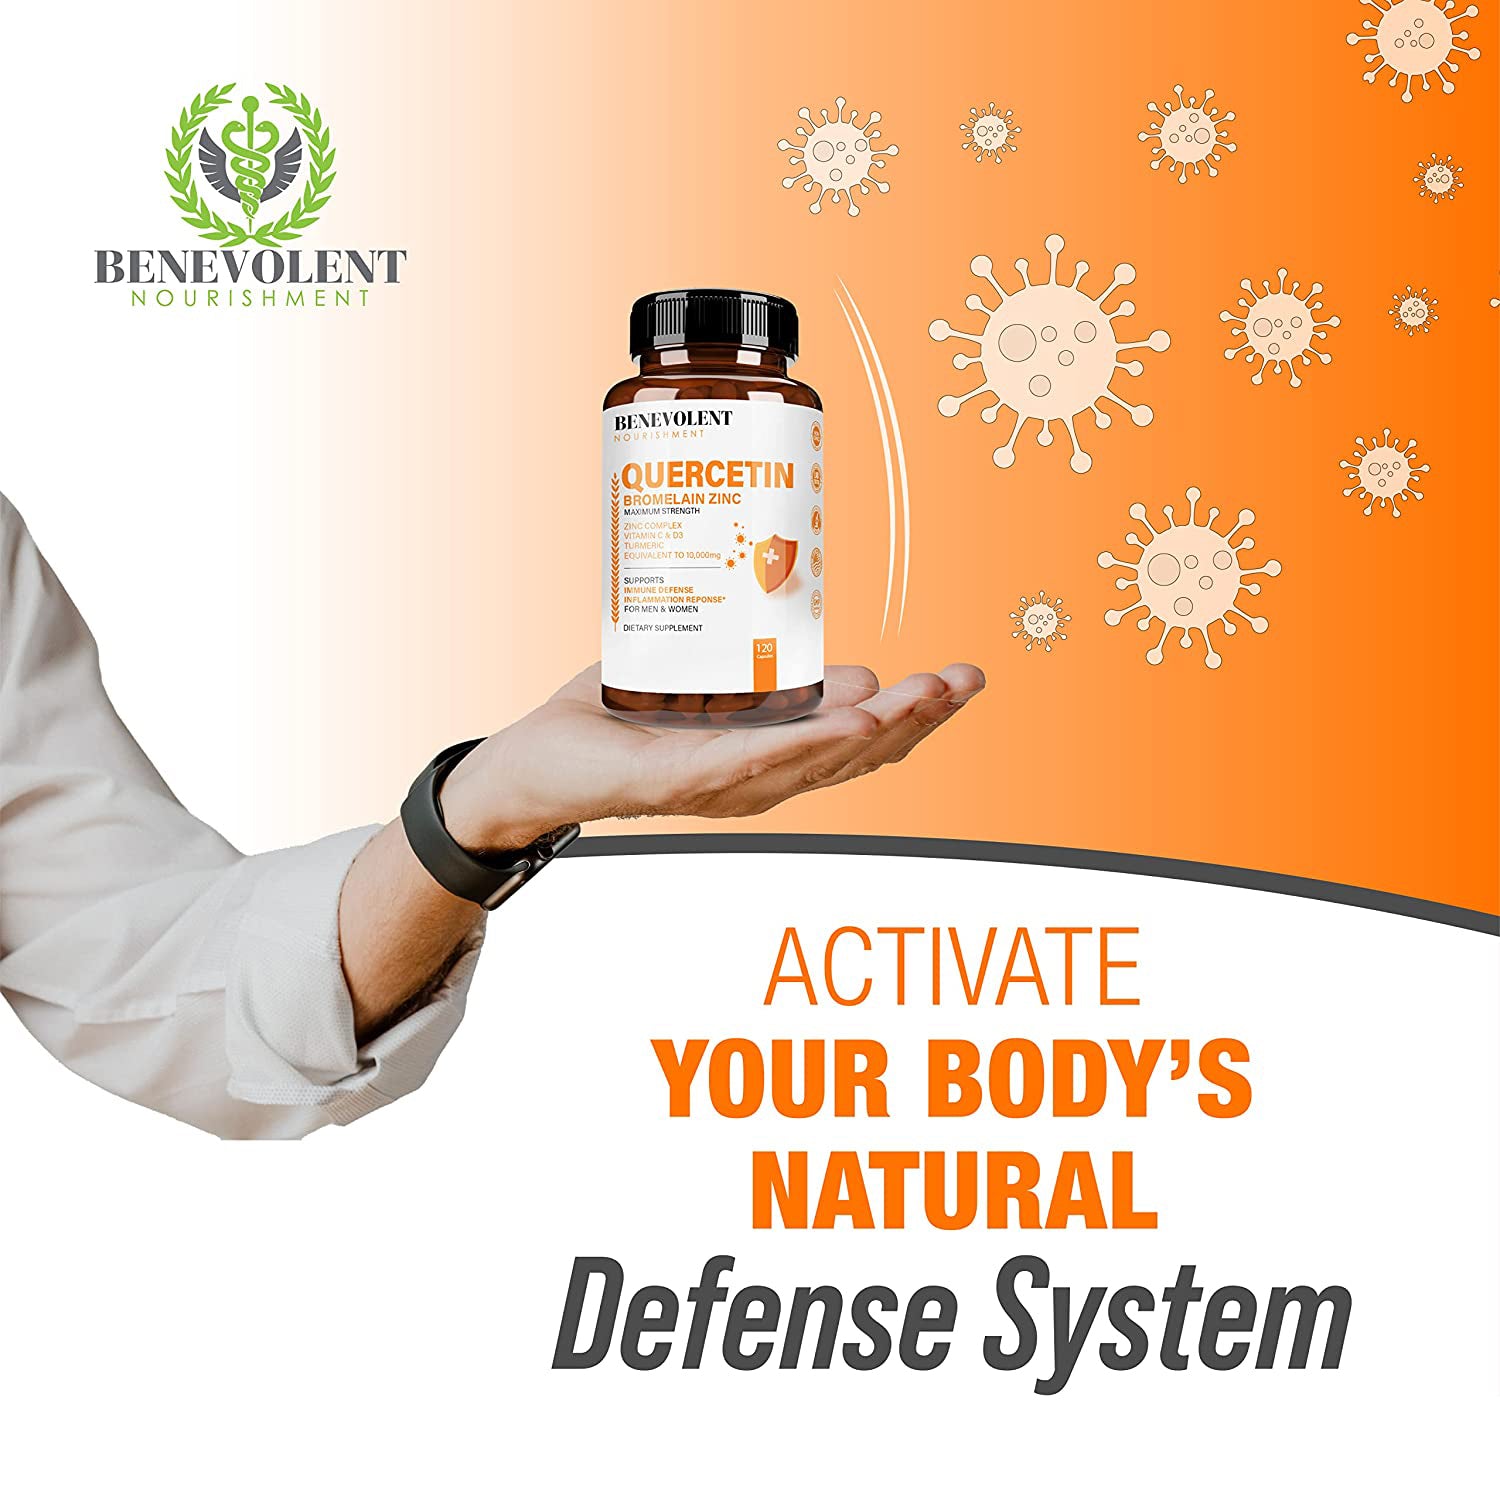 Activate your body's natural defense system